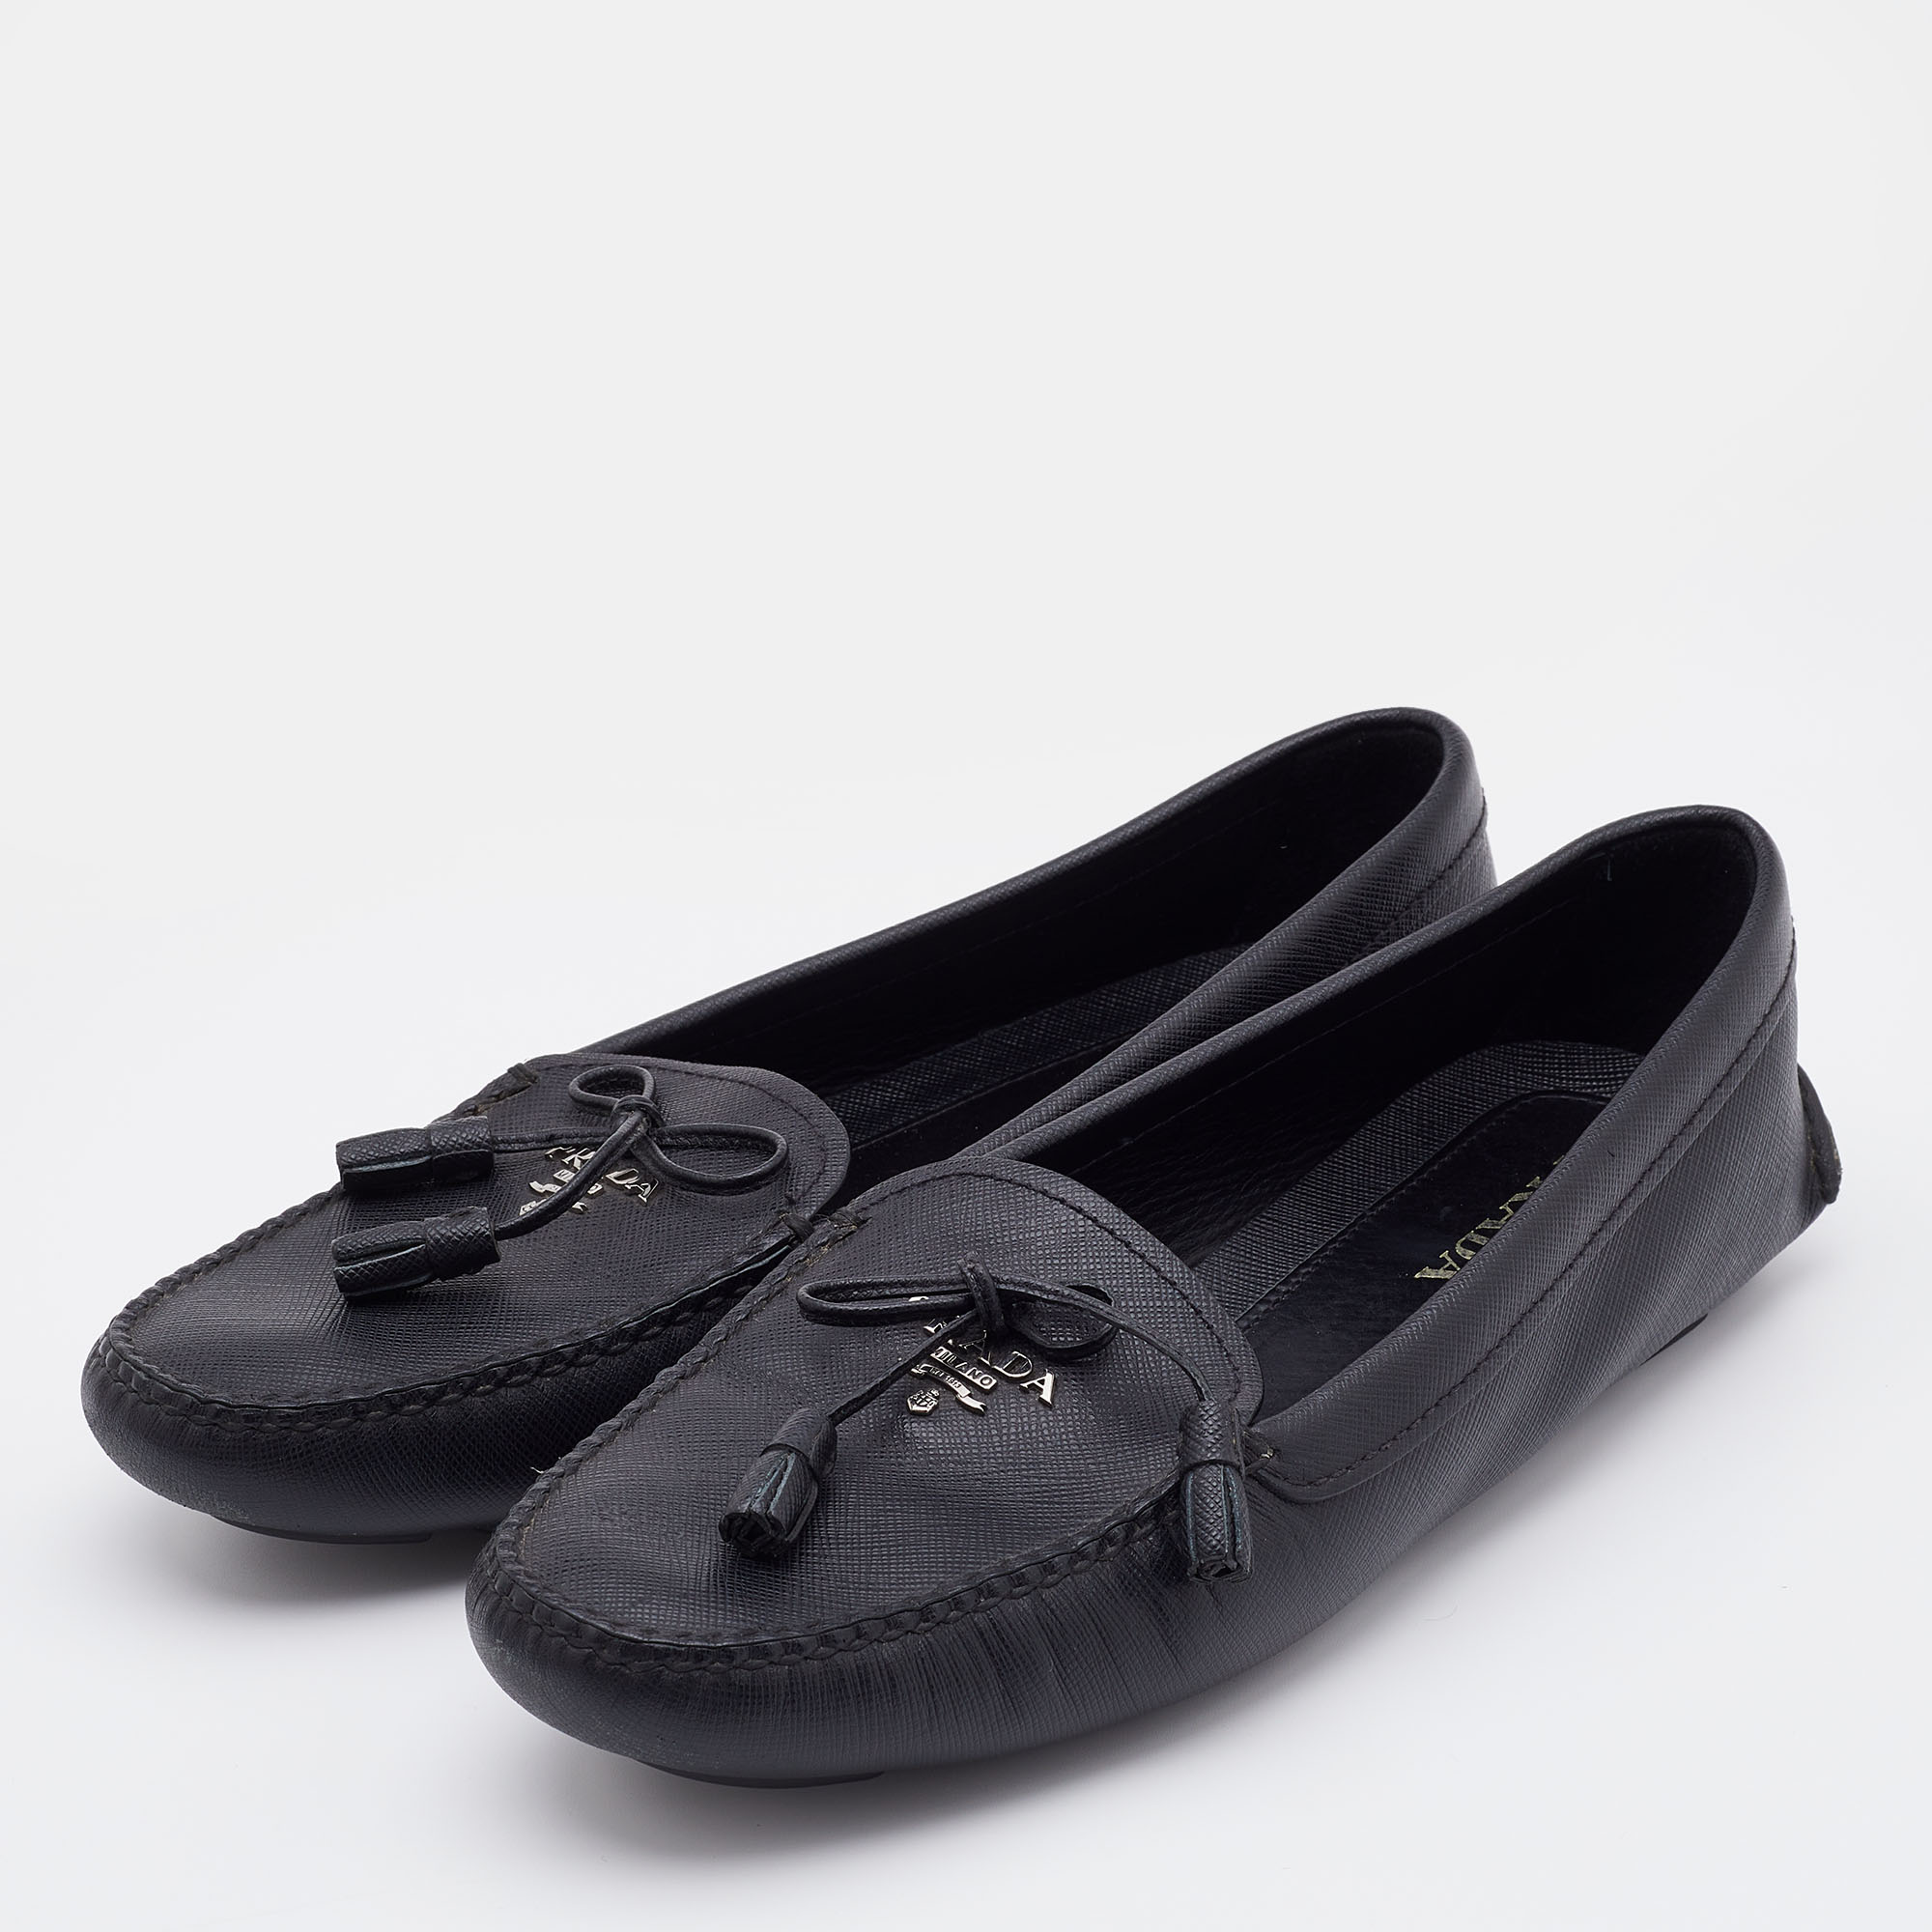 

Prada Black Patent Leather Bow Slip On Loafers Size